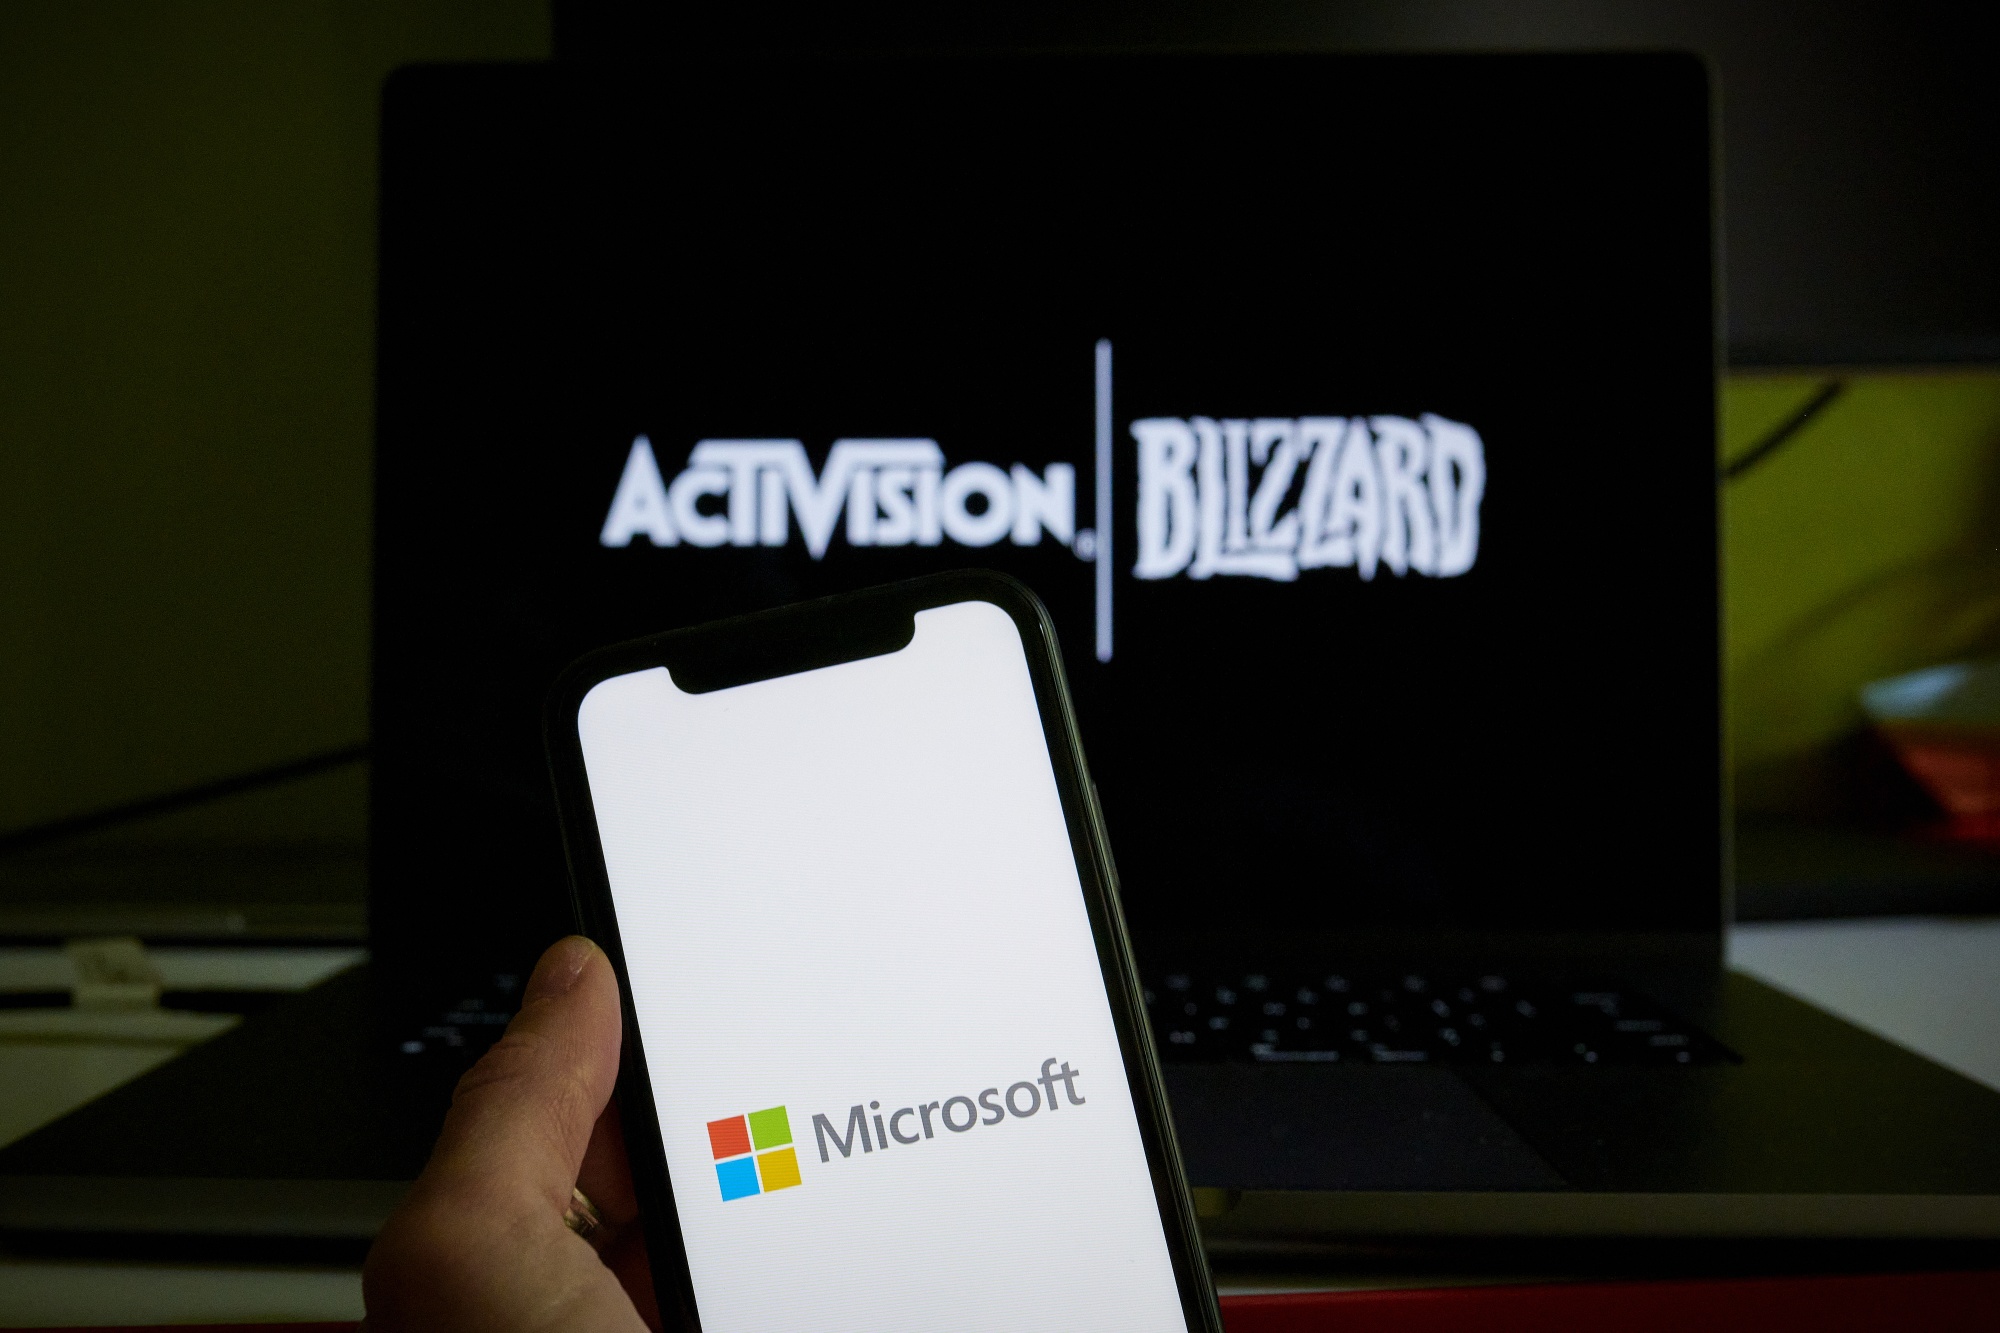 FTC seeks to block Microsoft's $69B deal to acquire Activision